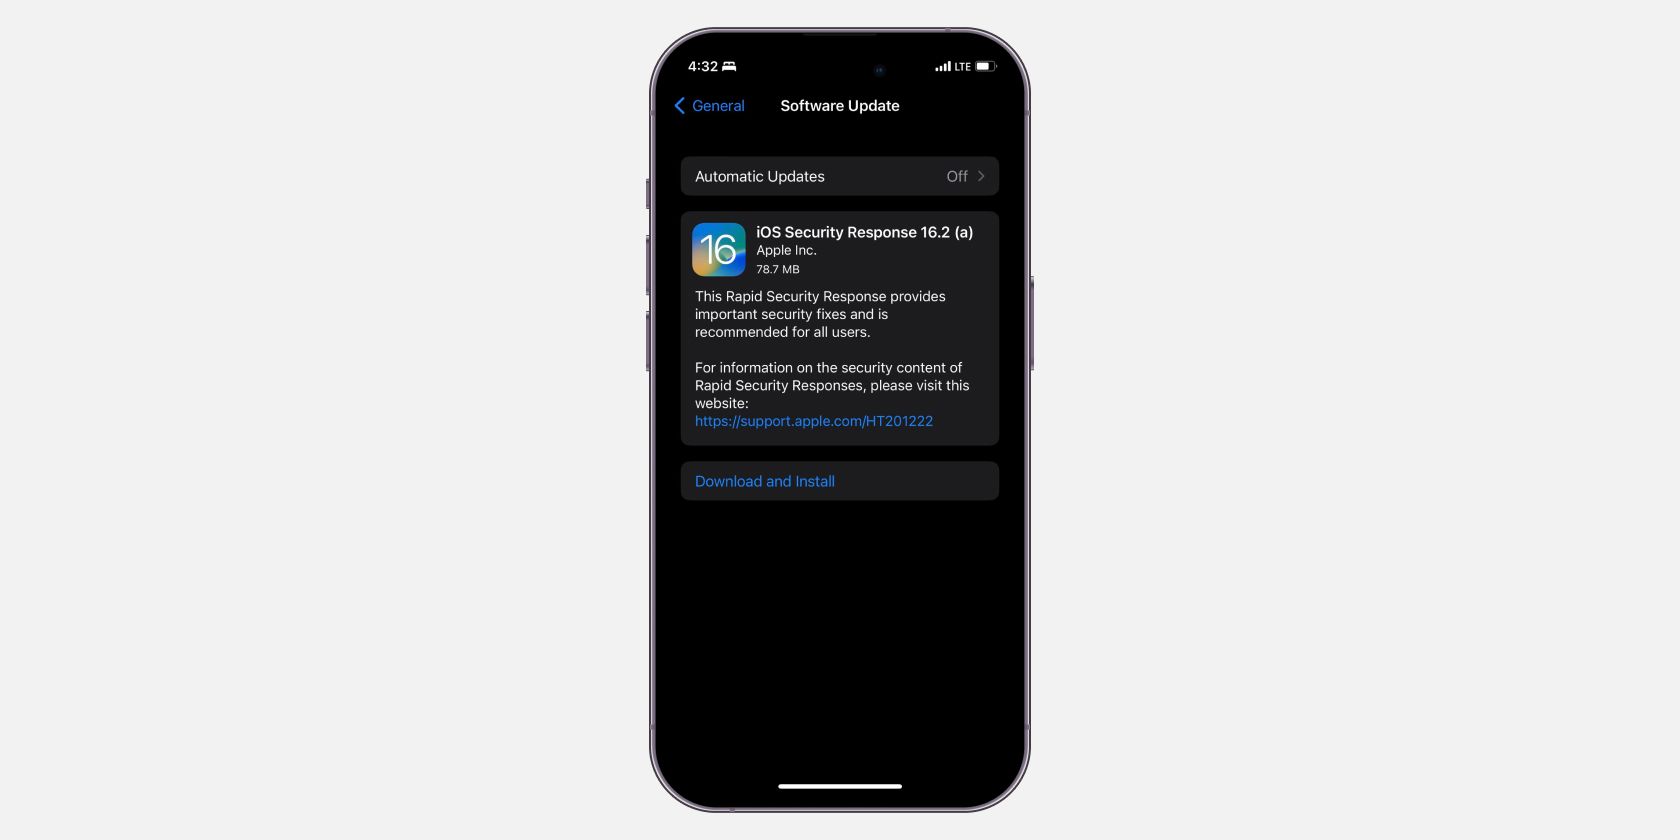 iOS Security Response update available on Software Update page